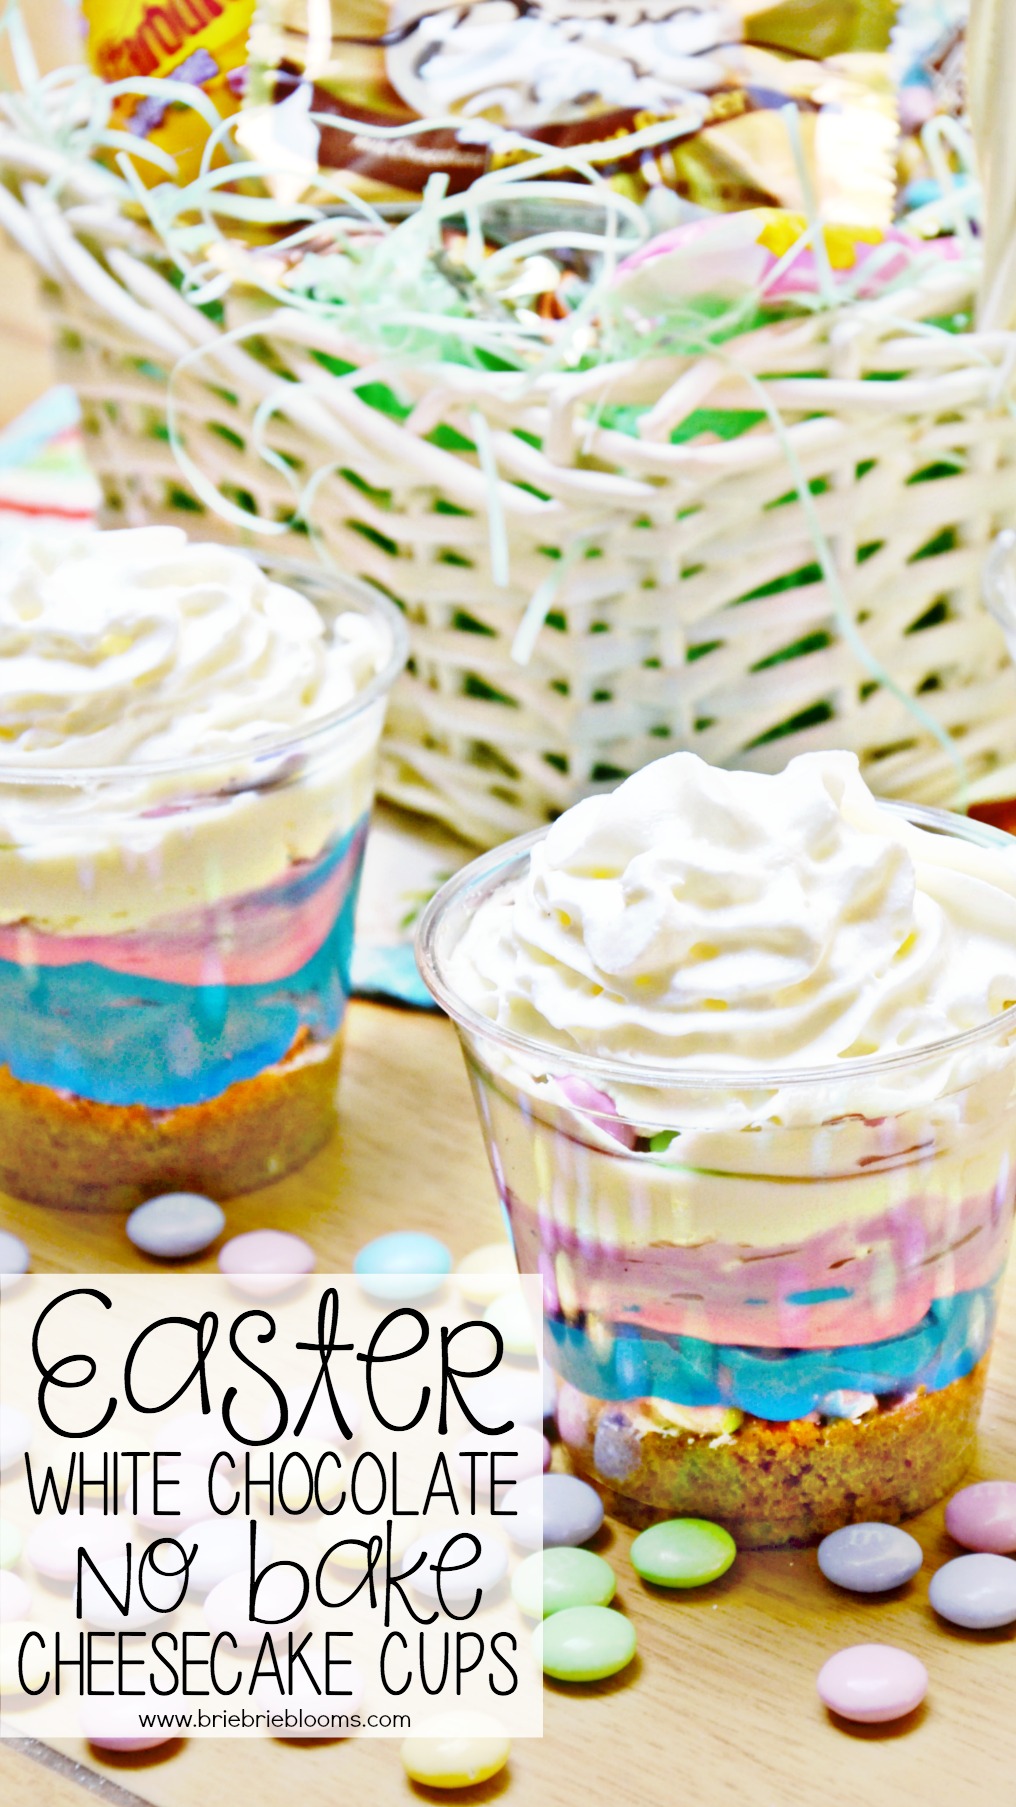 Make these easy Easter White Chocolate No Bake Cheesecake Cups with M&M's® White Chocolate!